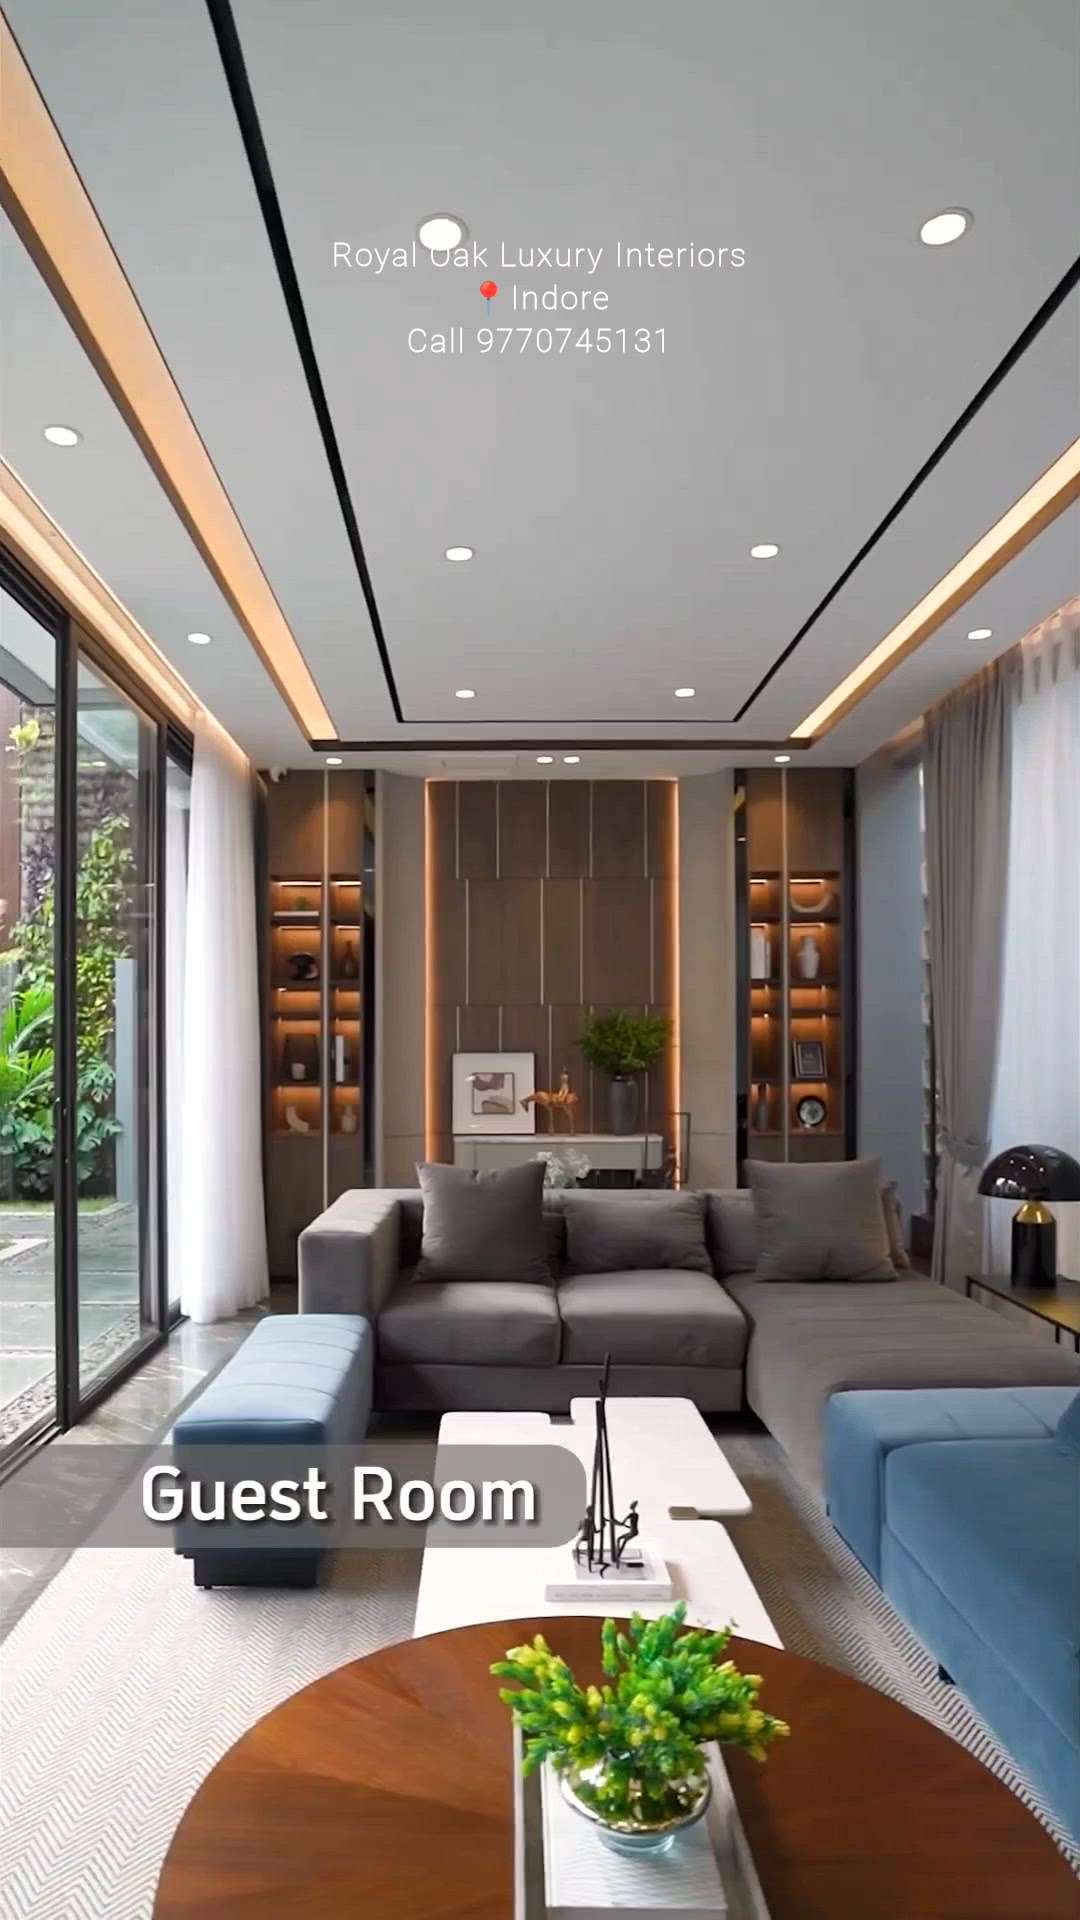 Call 9770745131. Royal Oak Projects specialize in luxury interior design projects in Indore and surrounding cities. Message us for free consultation and designing custom interiors for your home or office. 

___________
#home #homesweethome #homedecor #homedesign #homeinterior #architecture #builder #interiordesign #design #luxury #luxuryhomes #housedesign #interior #construction  #homeinspiration #homestyle #homes #realestate #koloapp  #livingroom #livingroomdecor #bedroomdesign #bedroom #pool #indore #india #indorecity #madhyapradesh #mp #indori #indoregram